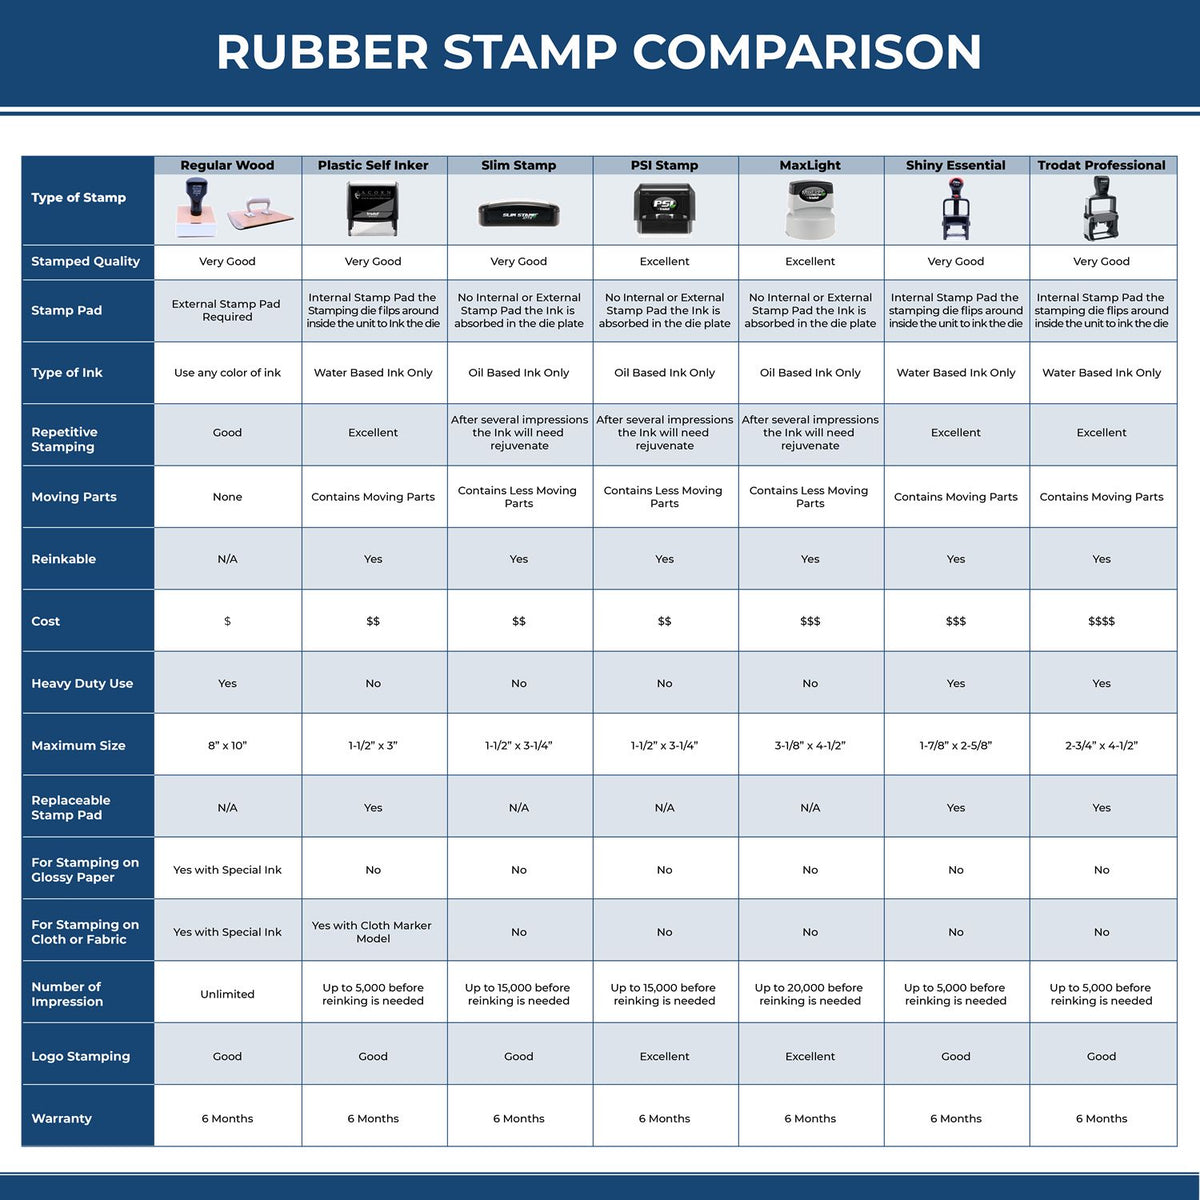 Large Self Inking Renewed Stamp 4583S Rubber Stamp Comparison